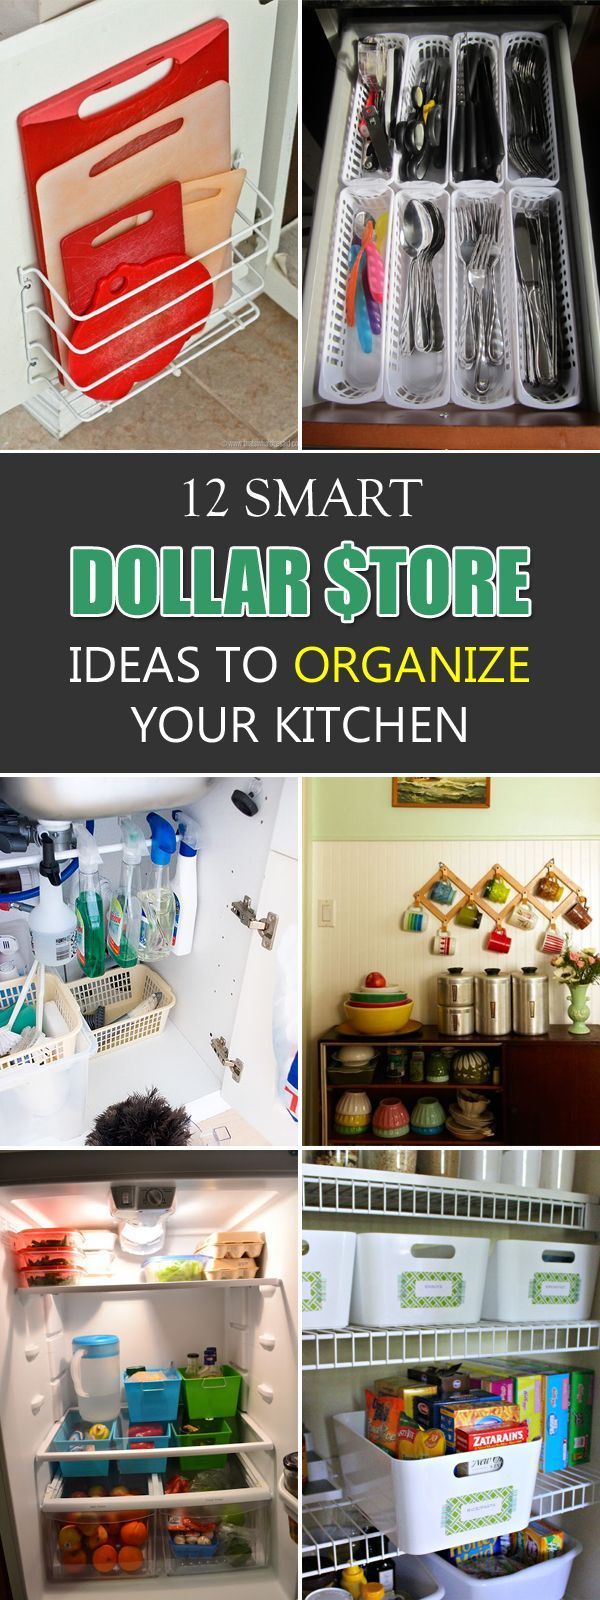 Easy ways to organize your kitchen using dollar store items.